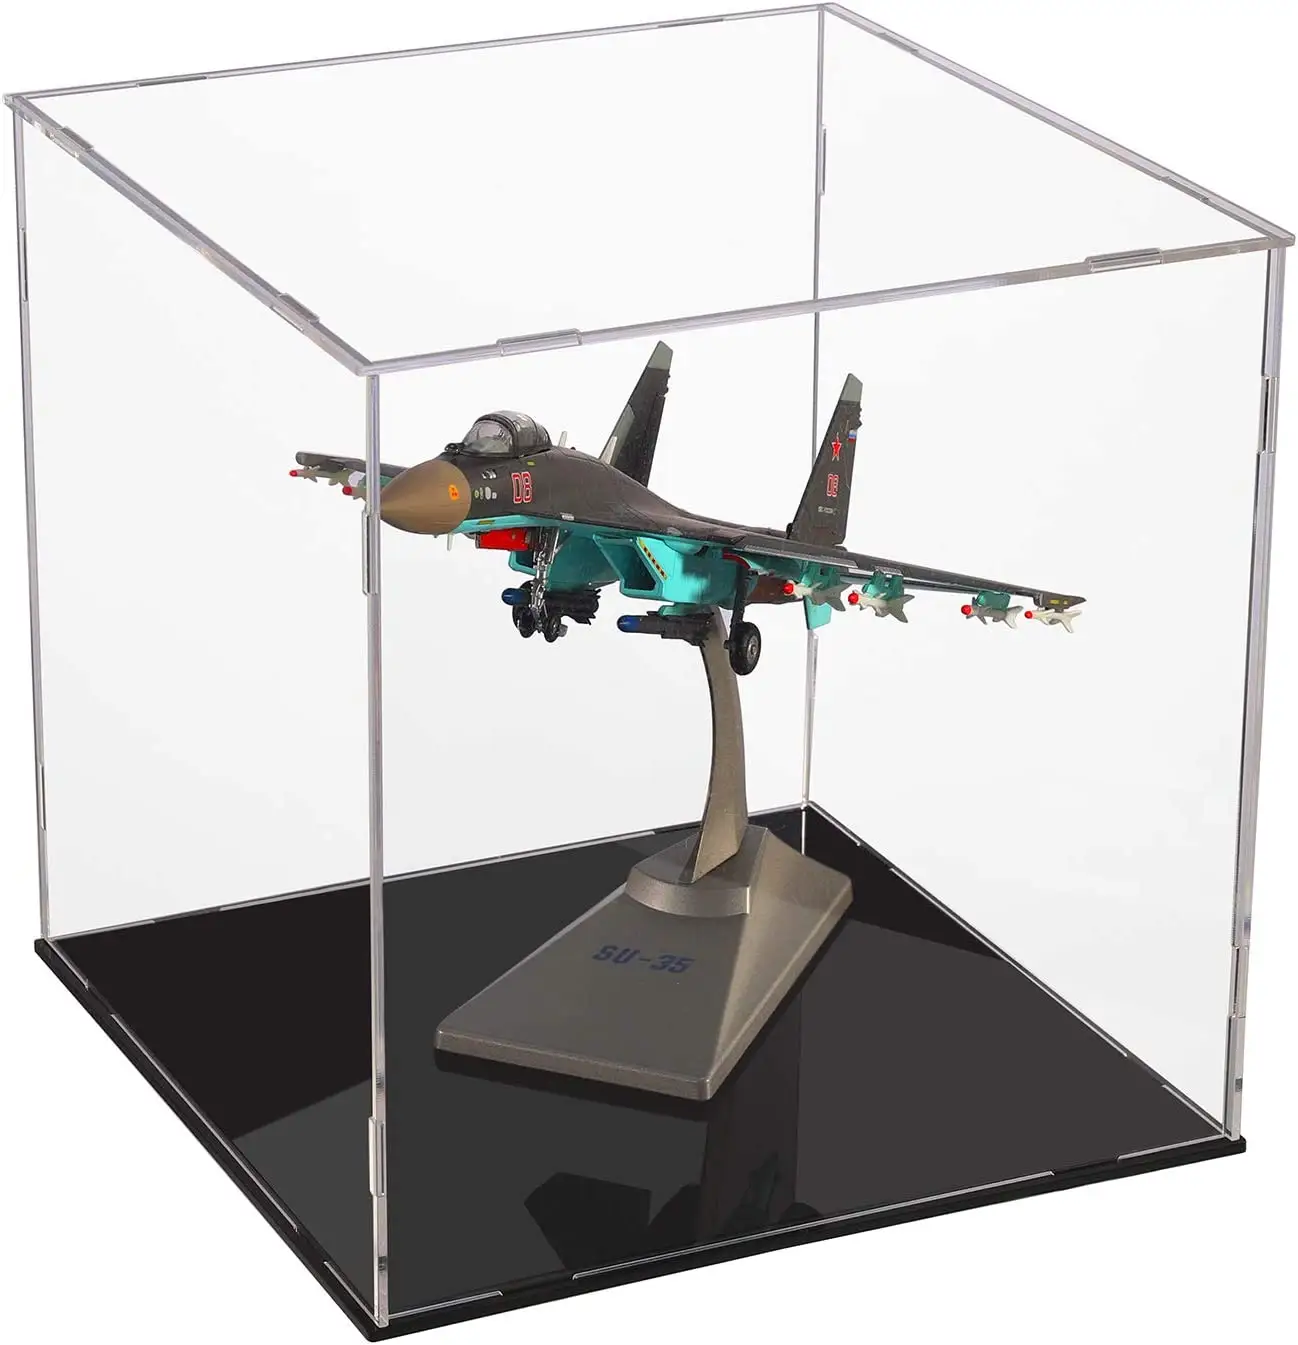 Customized Assemble Transparent Acrylic Display Box Display Cases For Figure Car Model Lego Ball Hat Shops